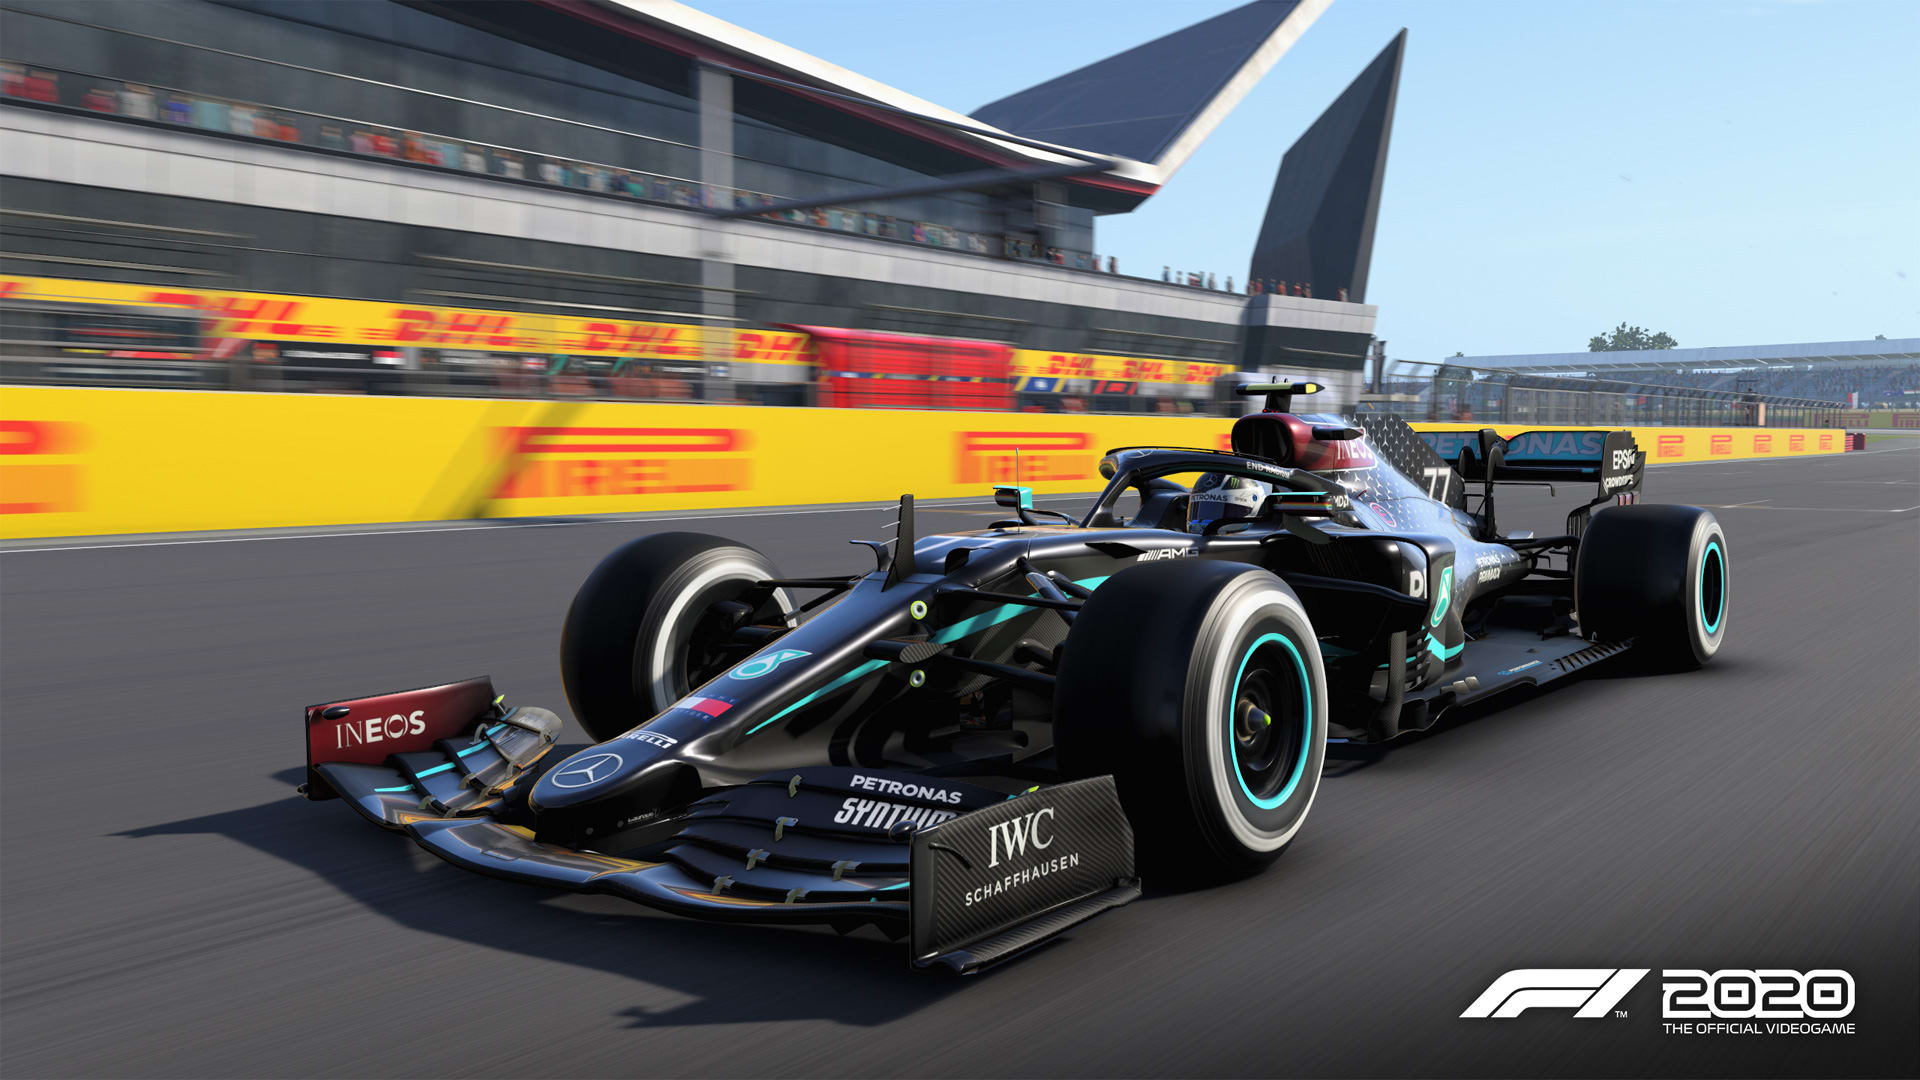 Rijp Afgrond Metafoor Codemasters update F1 2020 game with Mercedes' new black livery | Formula 1®